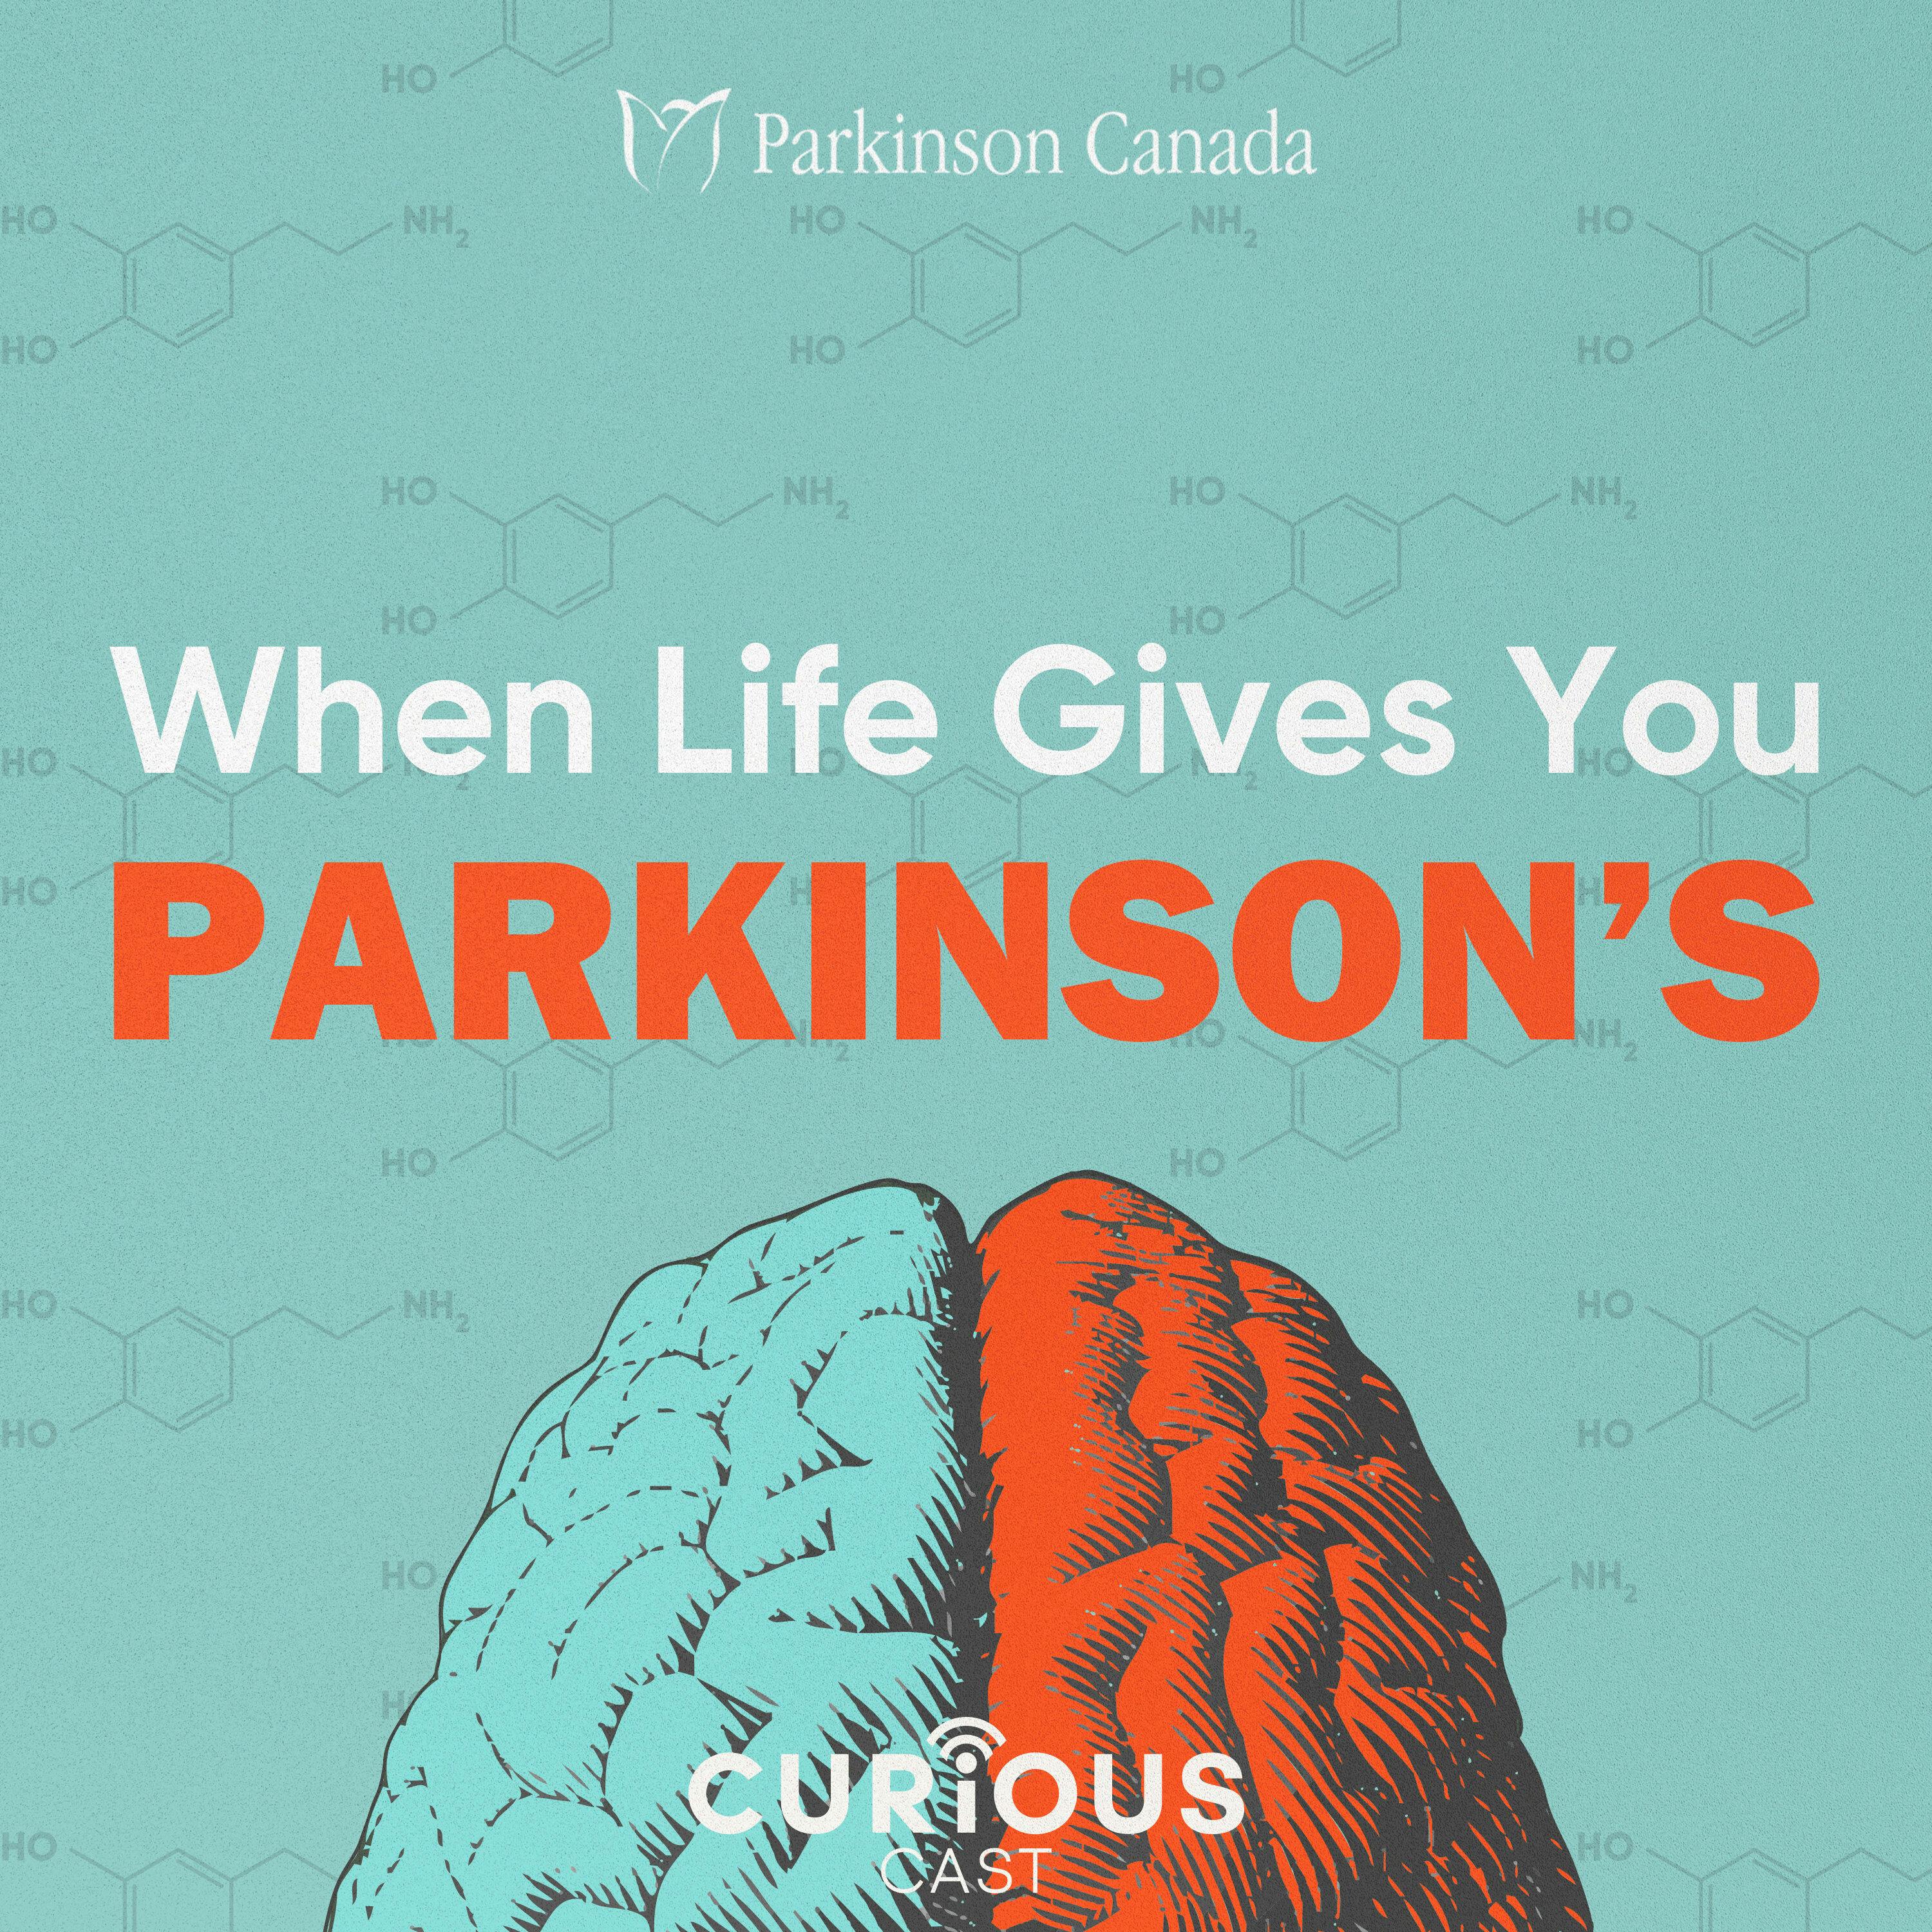 Exercise is a Real Prescription for Parkinson’s | 7